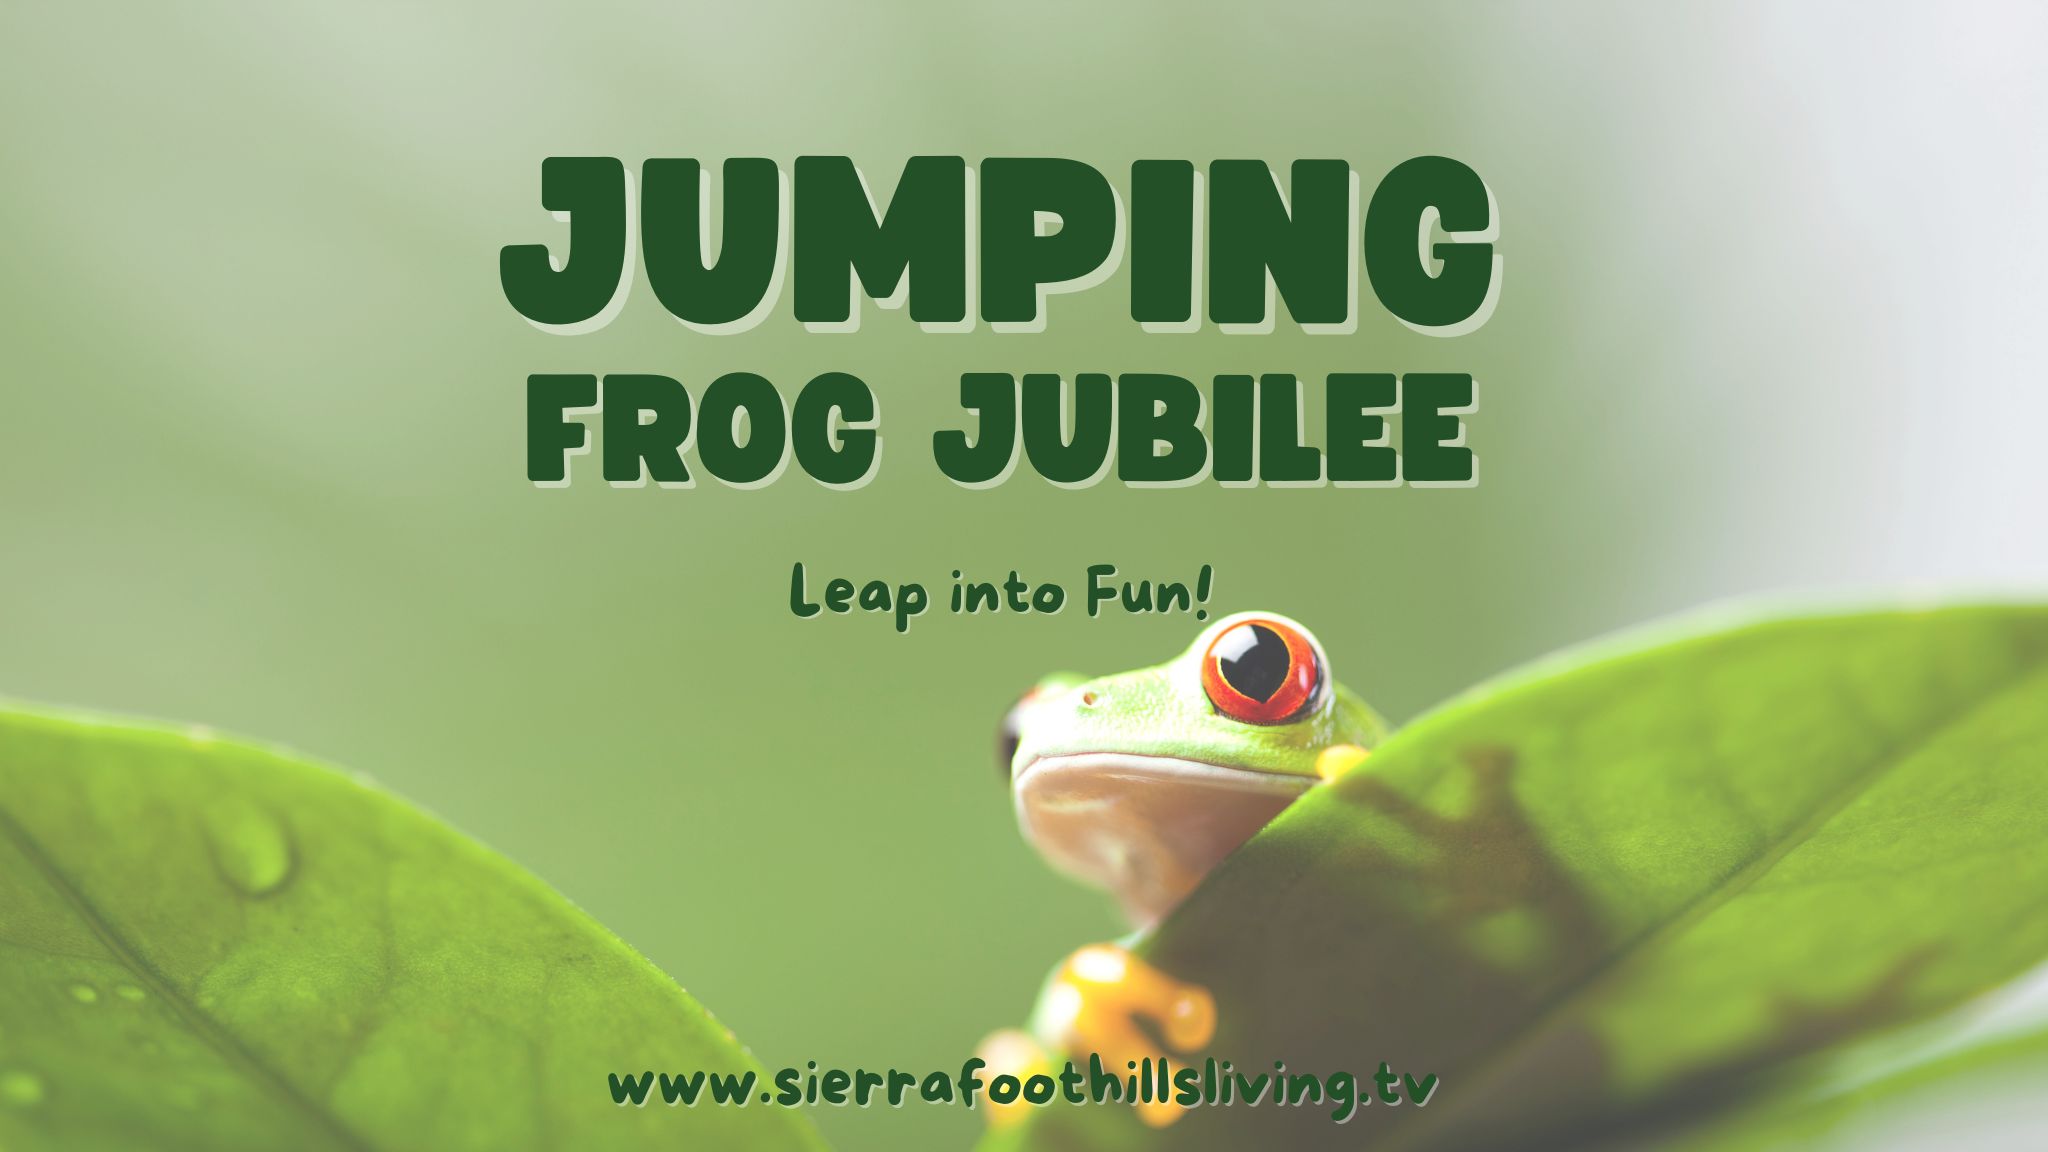 the Calaveras County Fair & Jumping Frog Jubilee